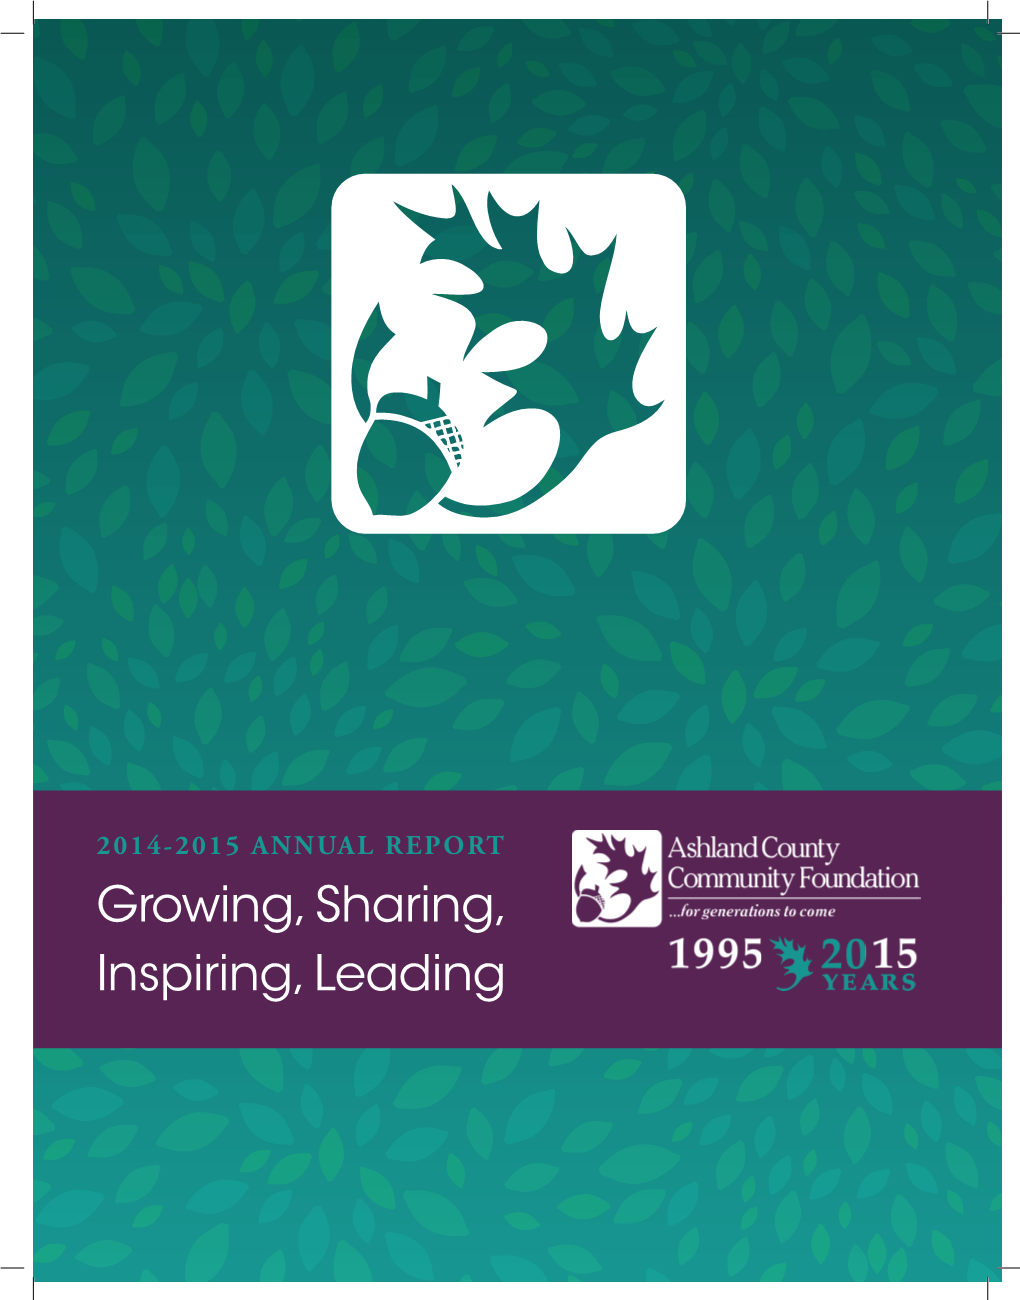 2015 ANNUAL REPORT Growing, Sharing, Inspiring, Leading Greetings to Our Friends and Neighbors in Ashland County!